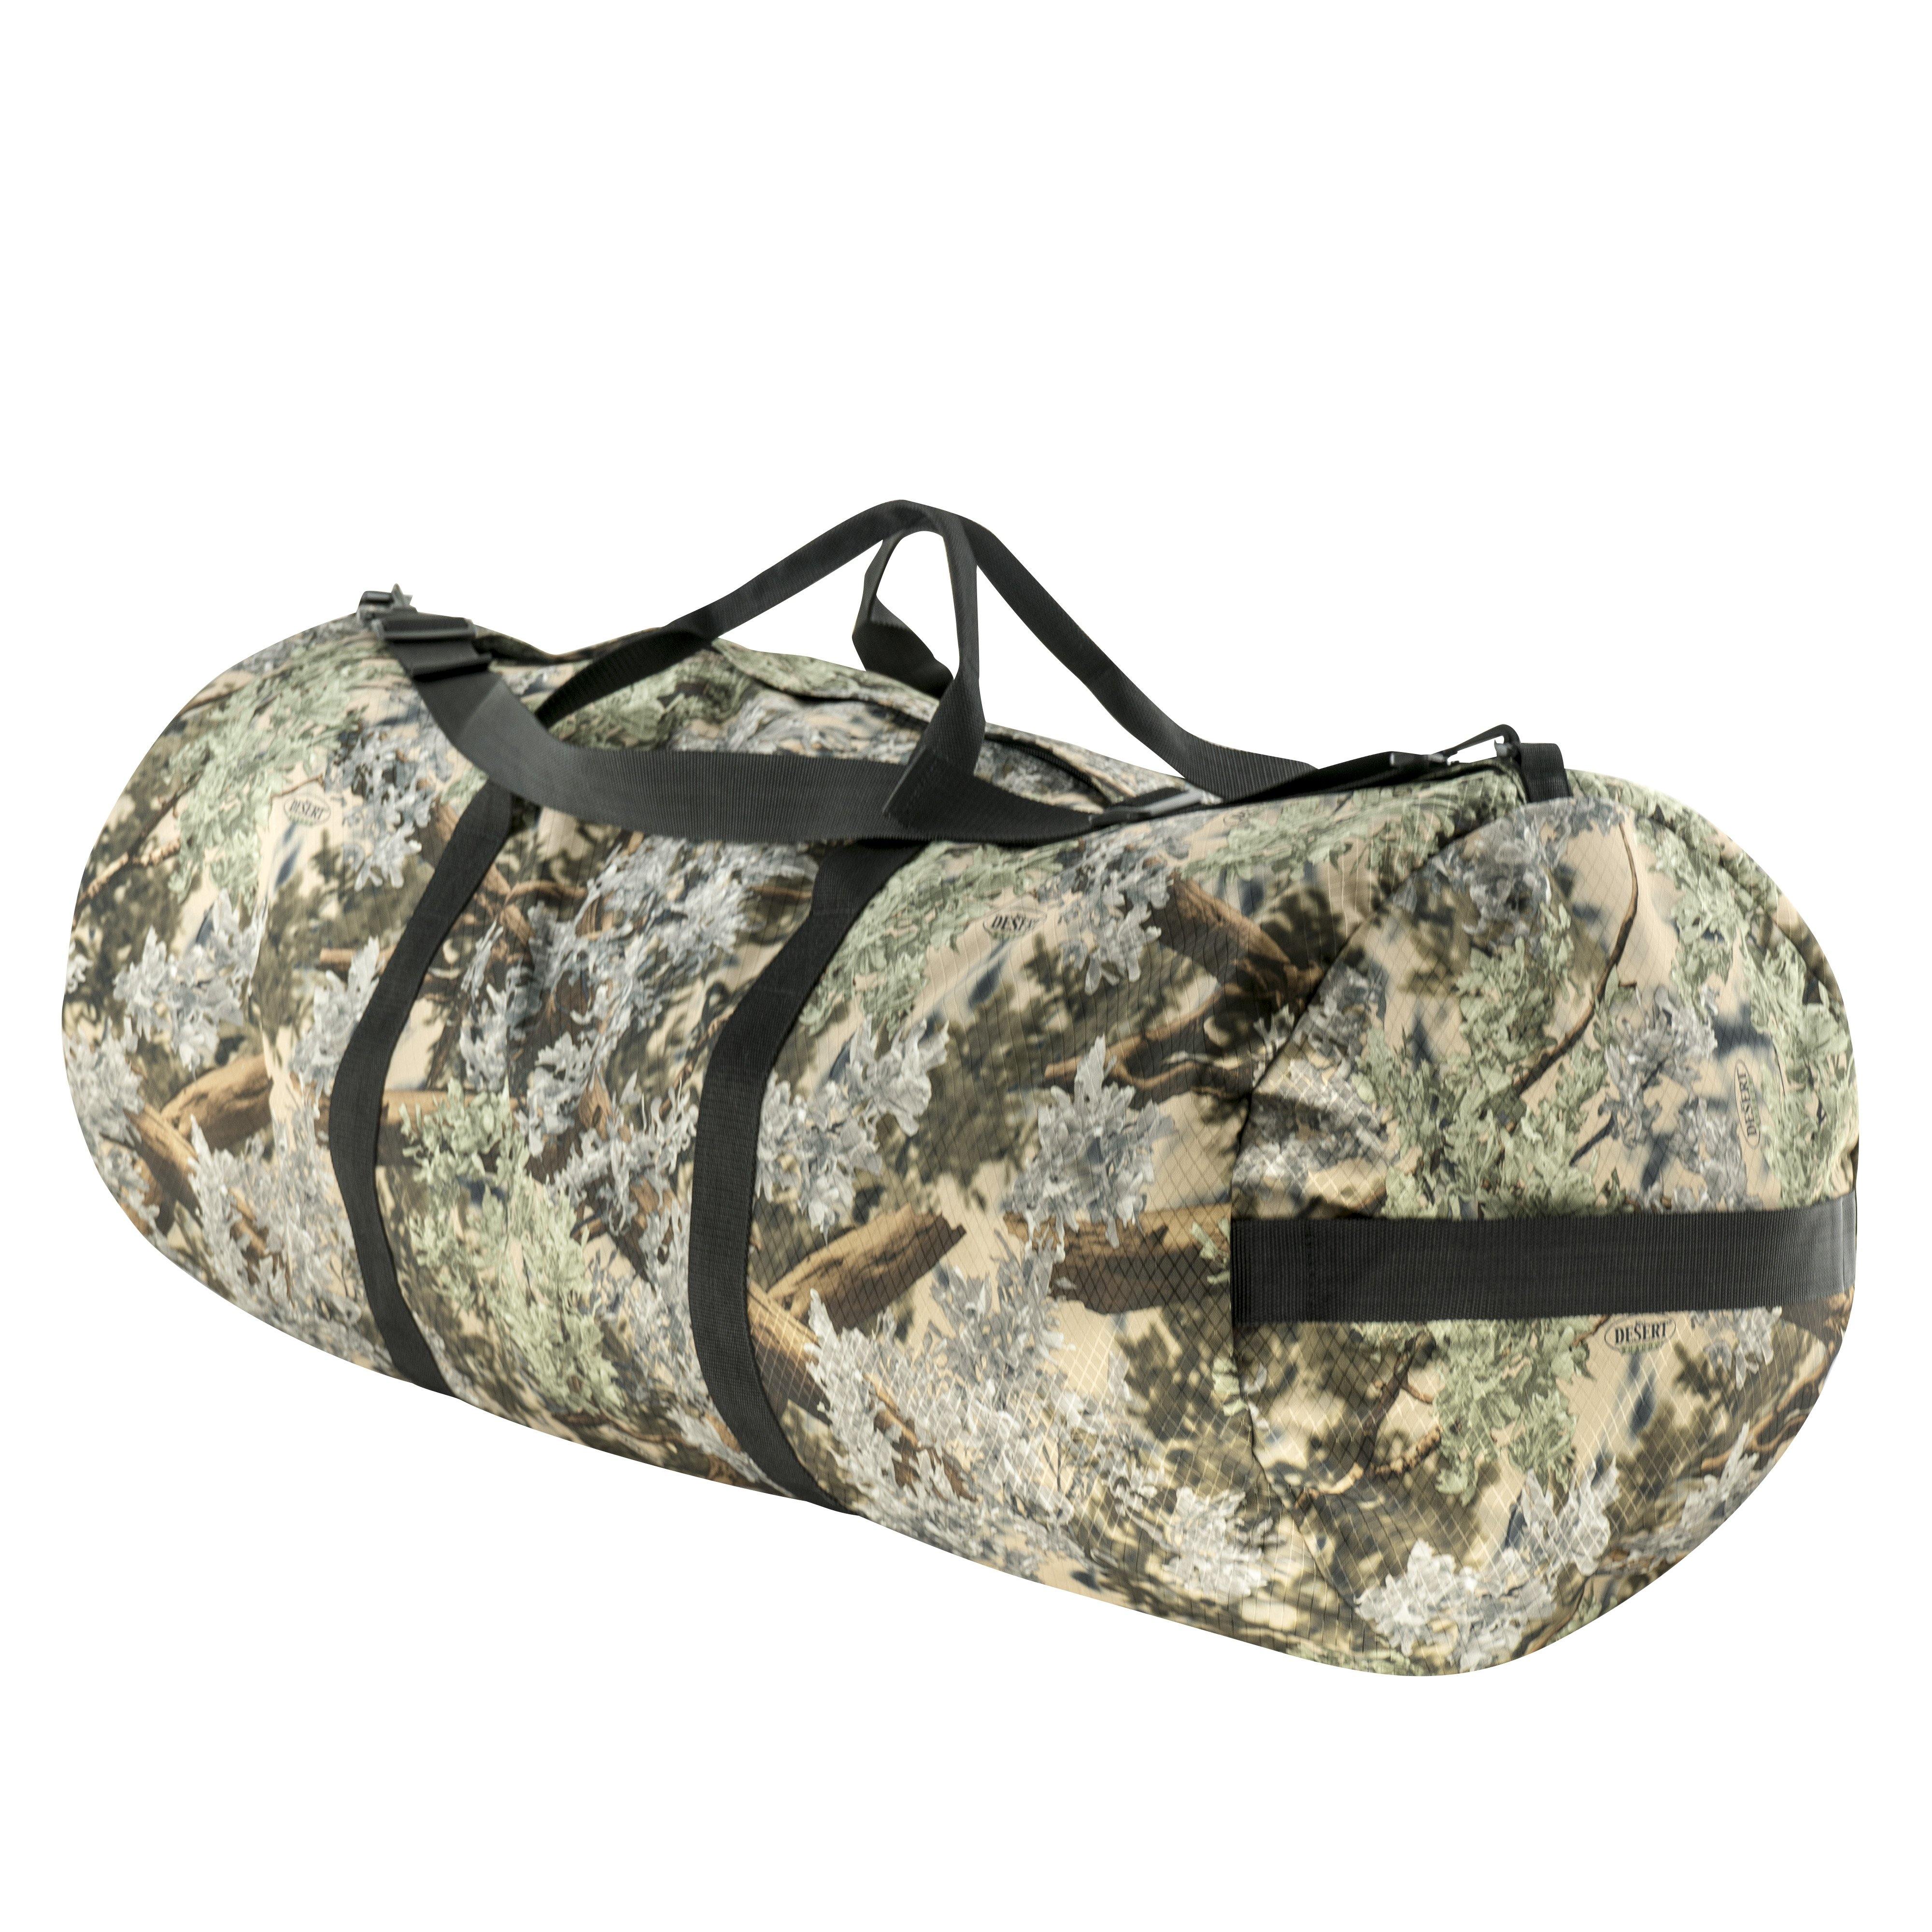 Studio photo of King's Camo Desert Shadow print SD1842DLX Standard Duffle by Northstar Bags. 175 liter duffel with diamond ripstop fabric, thick webbing straps, and a large format metal zipper. Guaranteed for life.